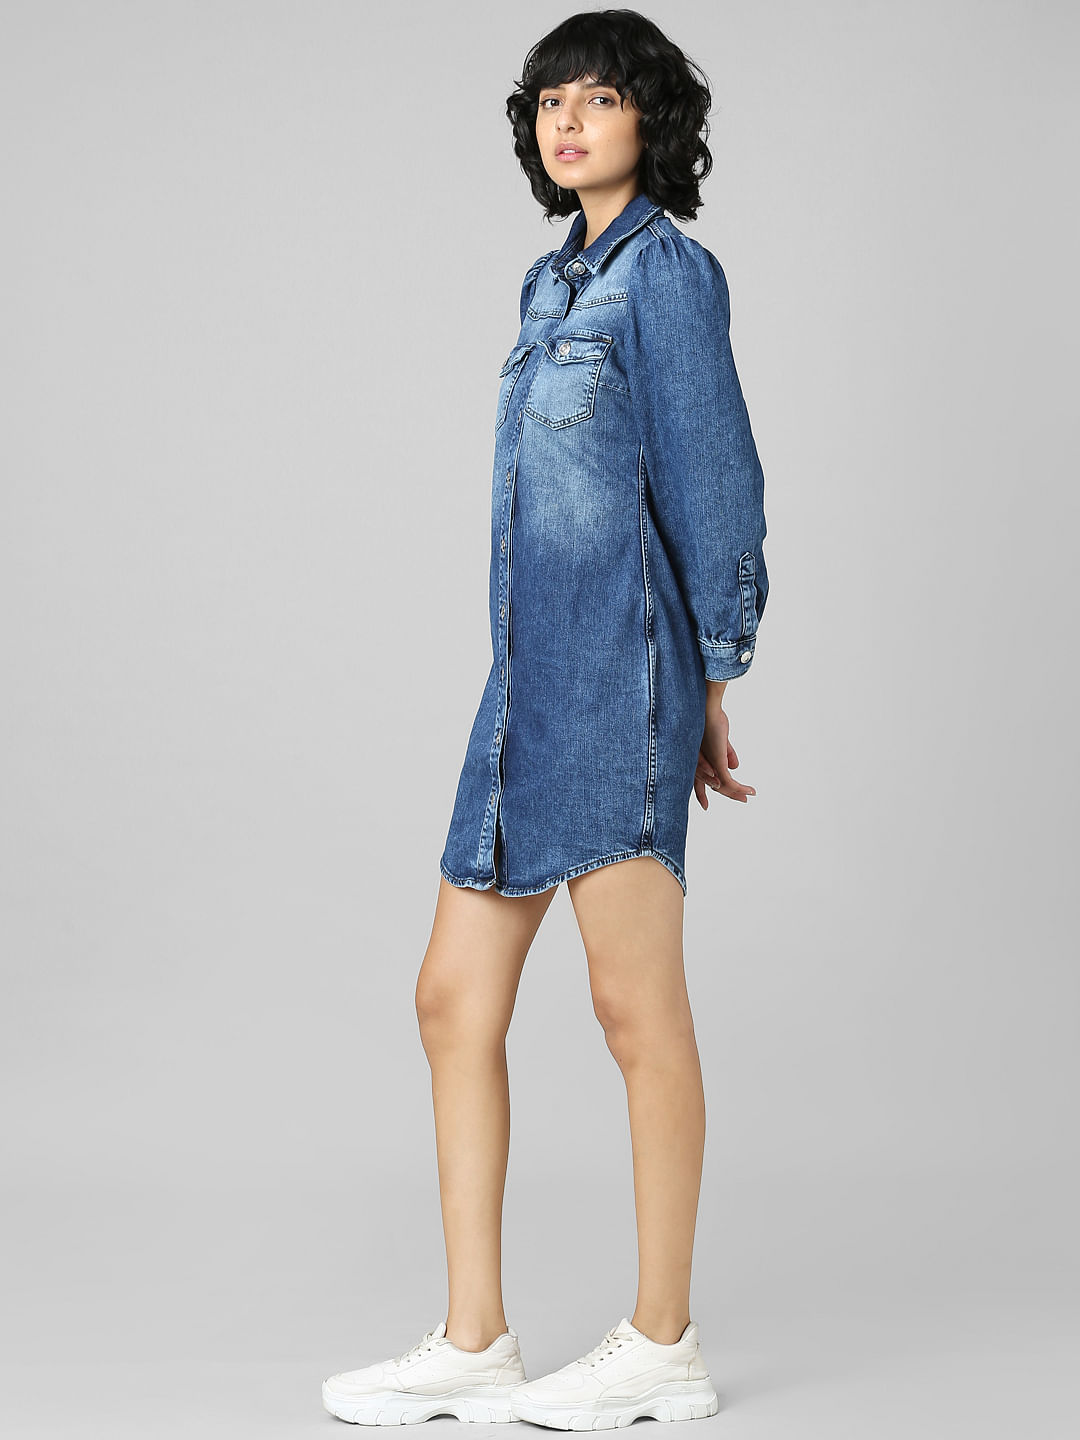 Break The Code: Stylish & Comfy Oversized Shirt Dress for Women -  Nolabels.in